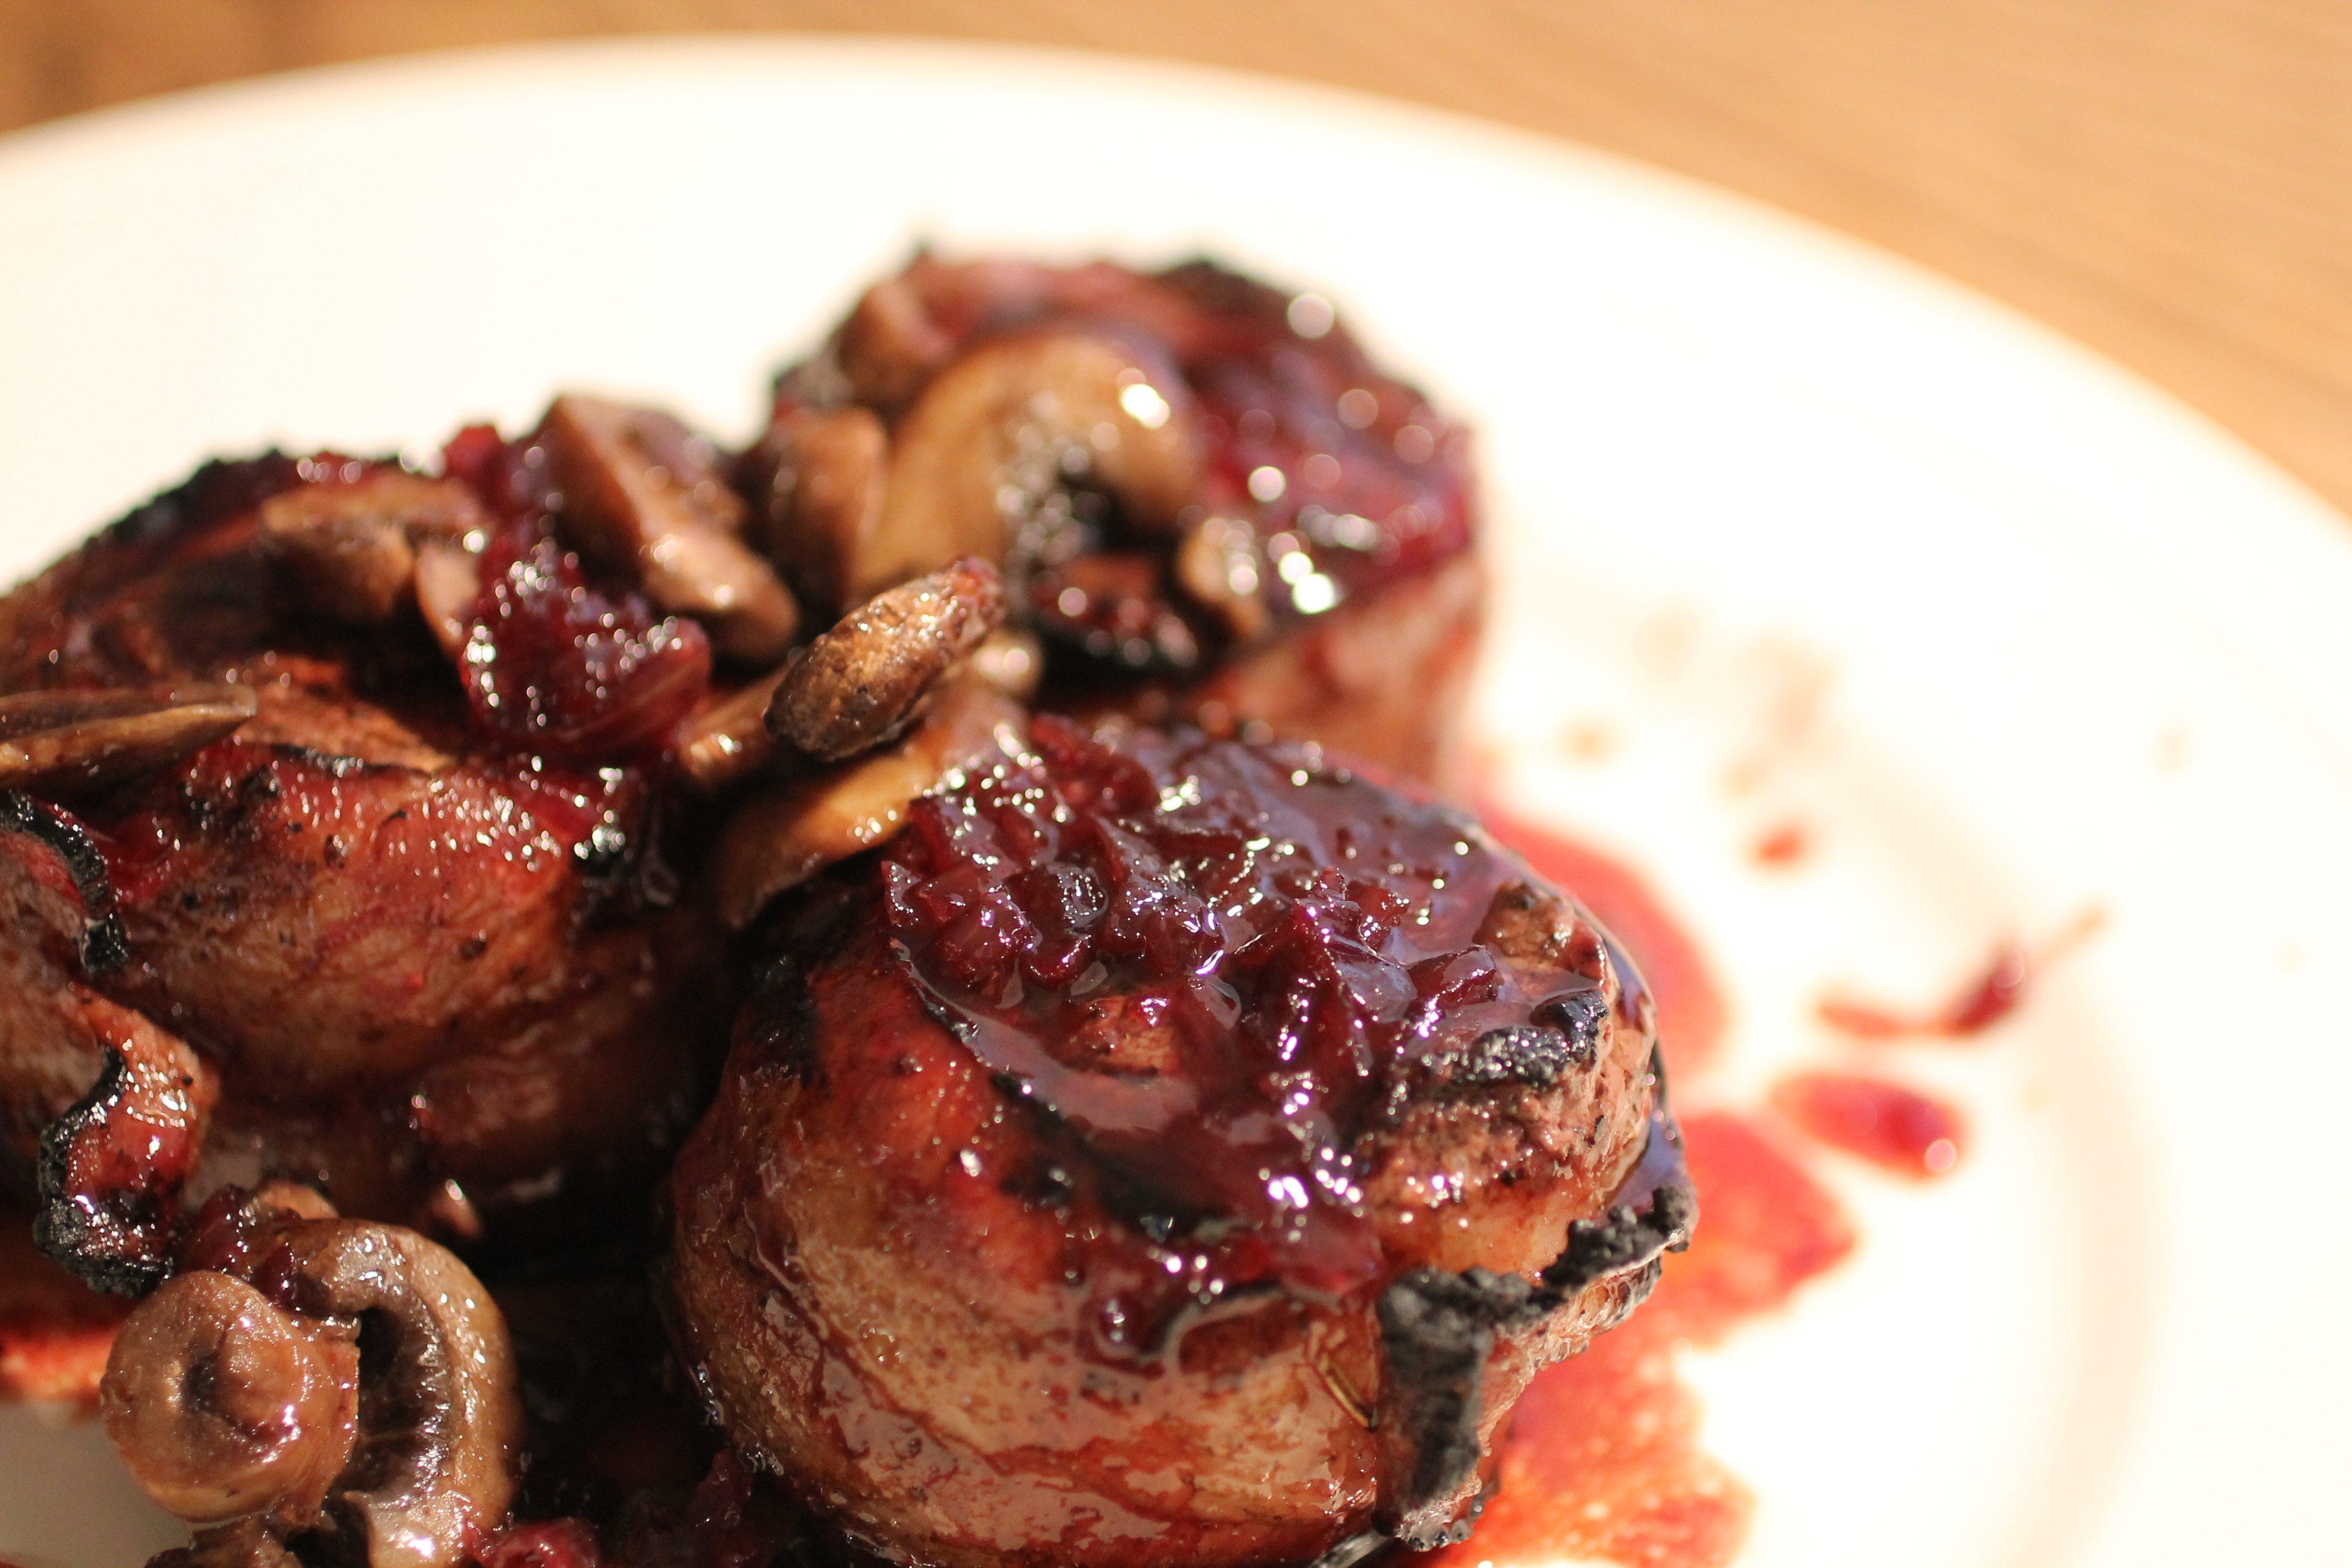 Bacon wrapped venison medallions with red wine sauce and mushrooms.